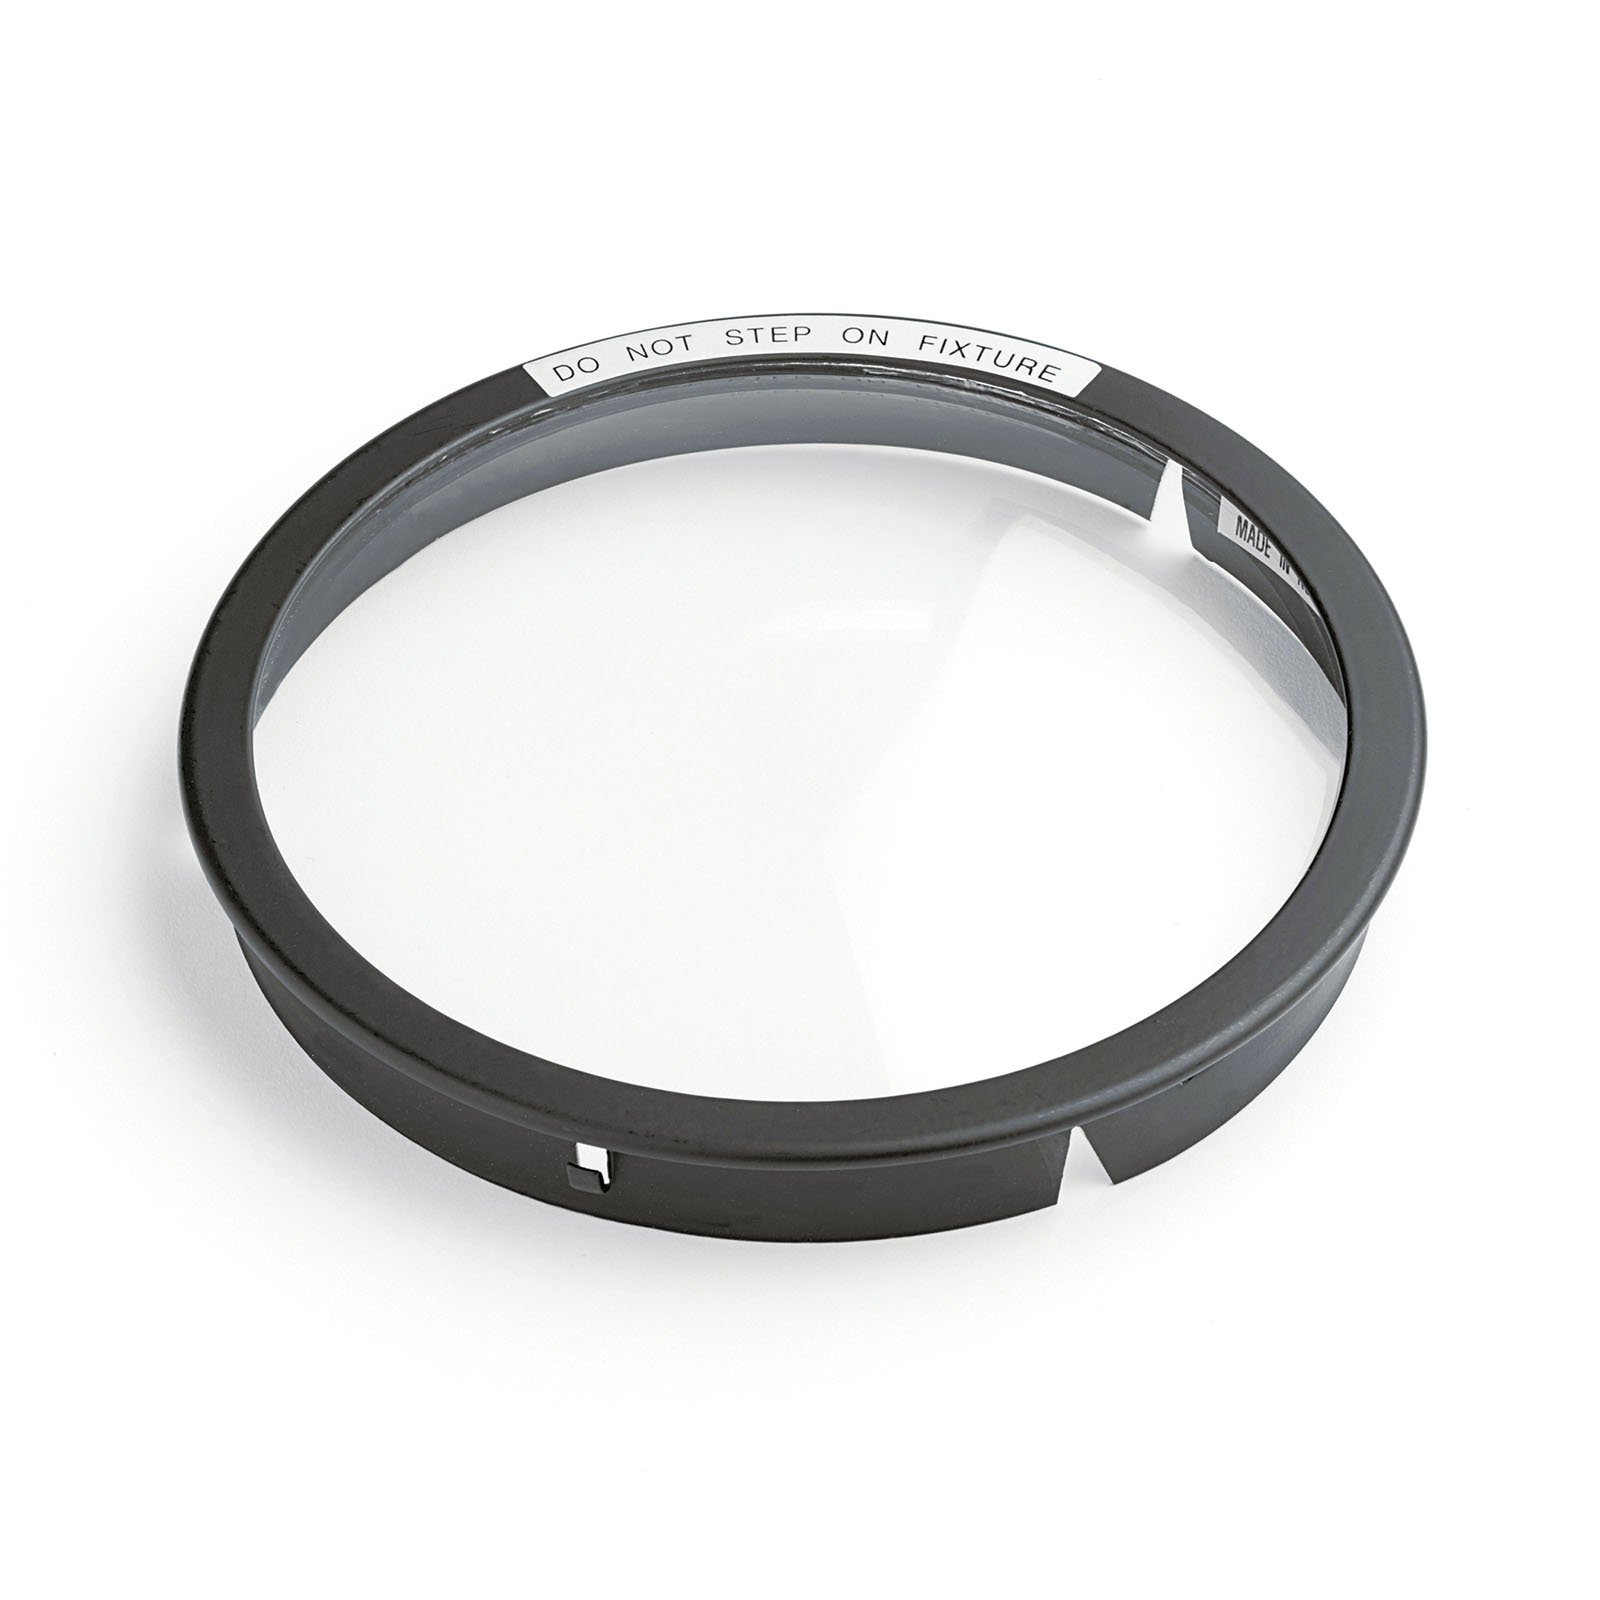 Lens - for use with fixtures 15088,15388. Heat-resistant glass lens for use with 15088 and 15388 well light